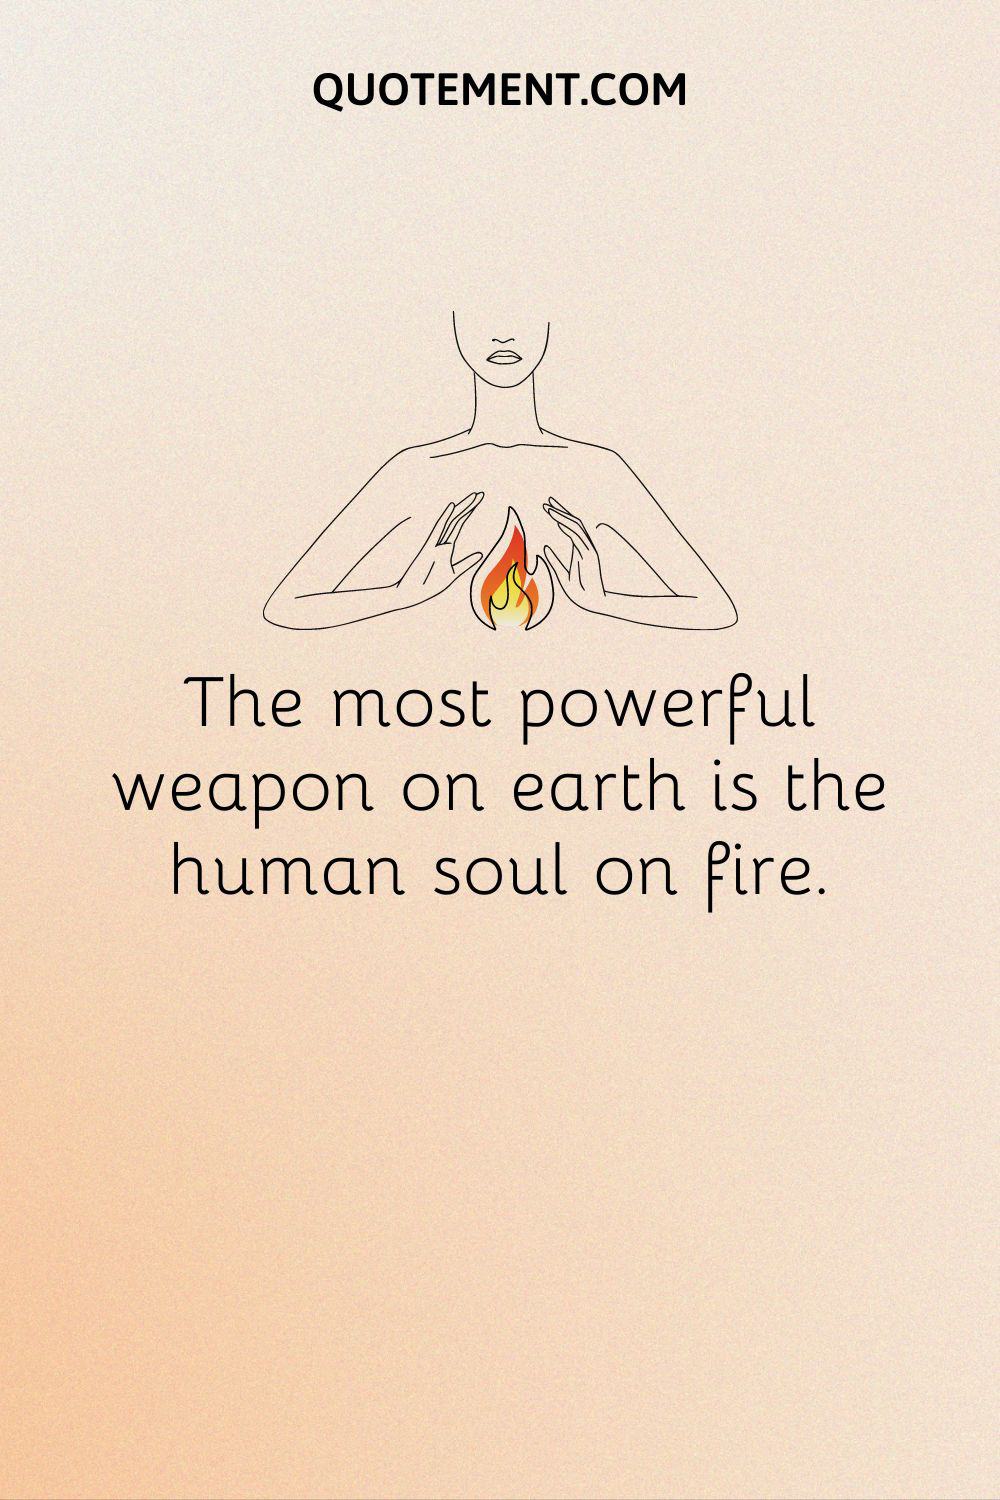 The most powerful weapon on earth is the human soul on fire